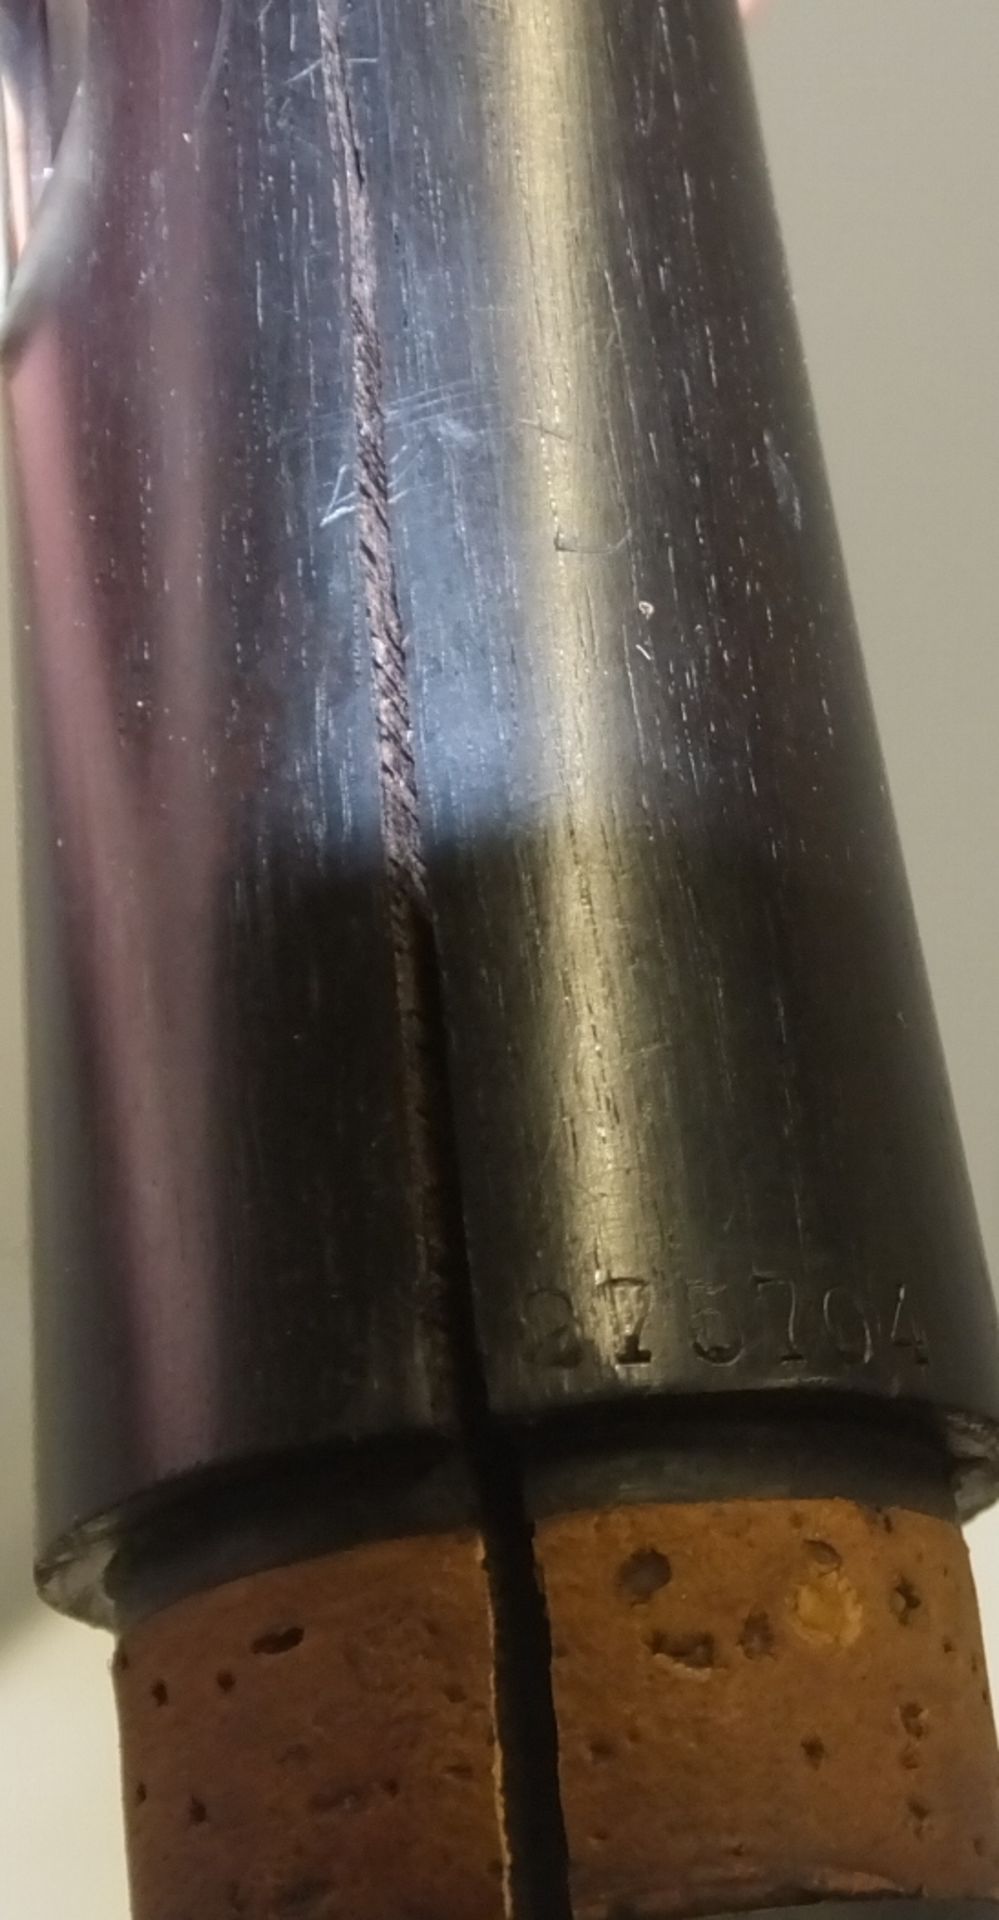 Buffet Crampon Clarinet (incomplete - damage as seen in pictures) - Serial Number - 275704 - Image 10 of 10